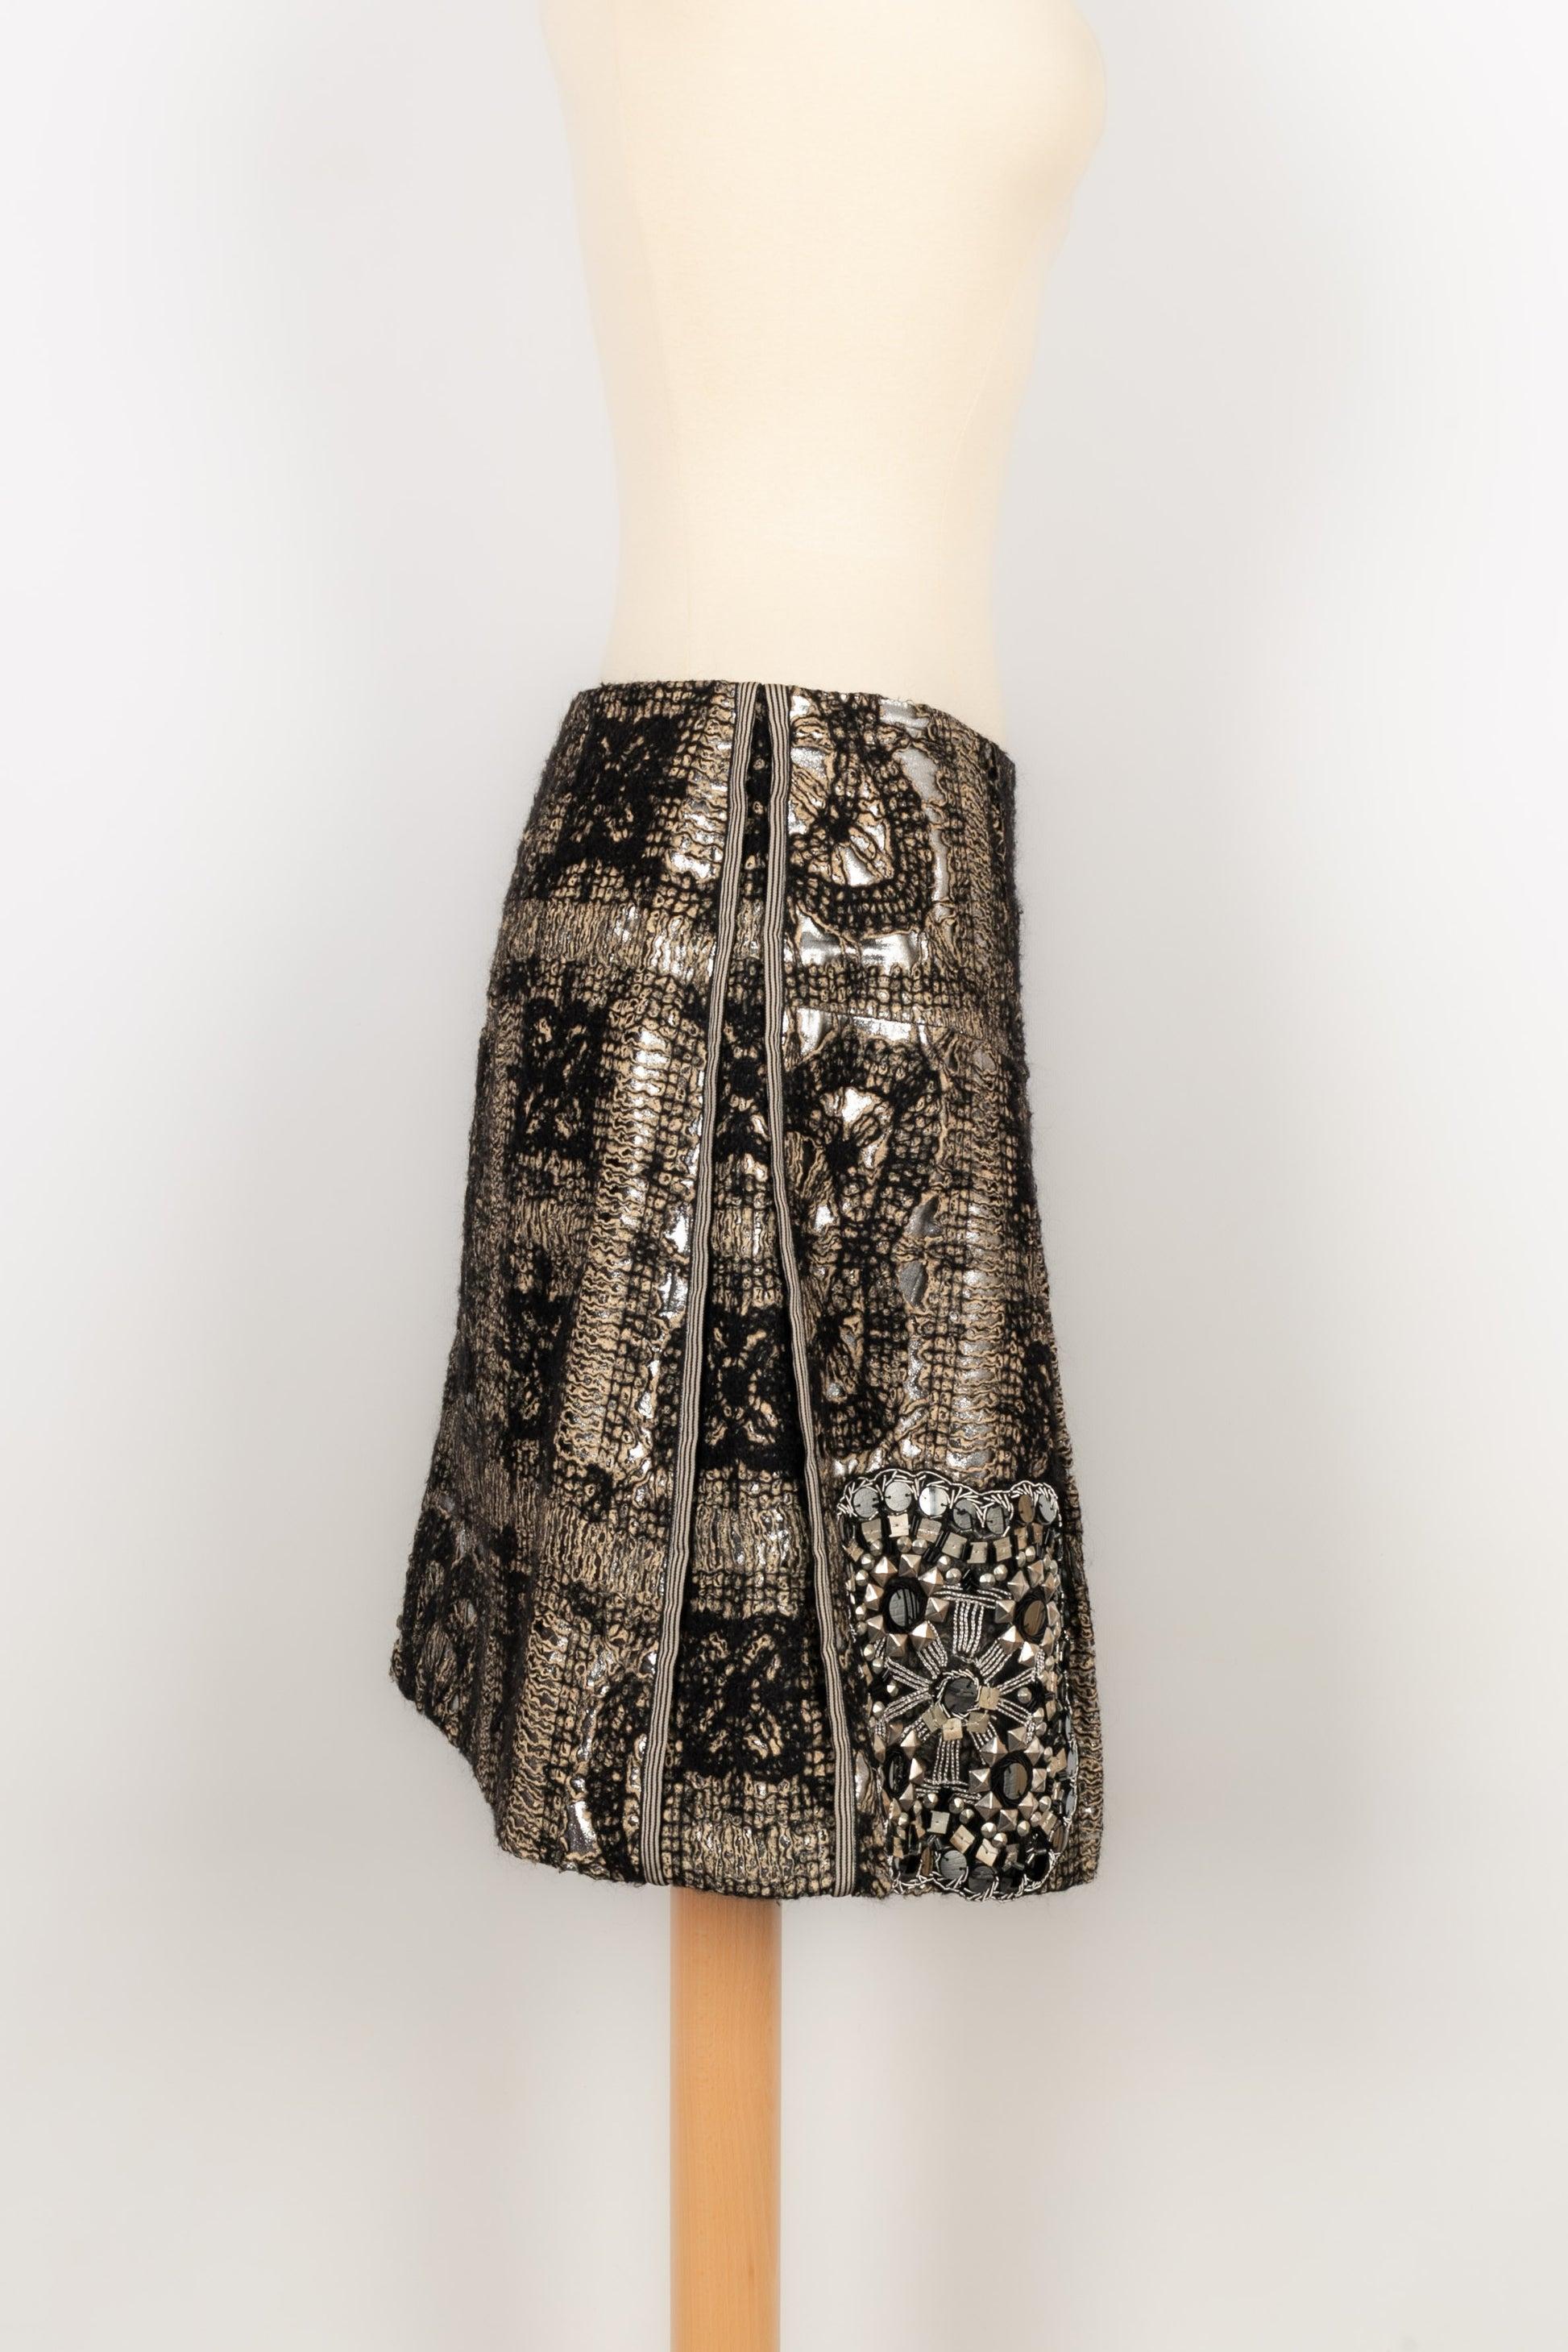 Christian Lacroix Blended Cotton and Mohair Wool Skirt, 2008 For Sale 1